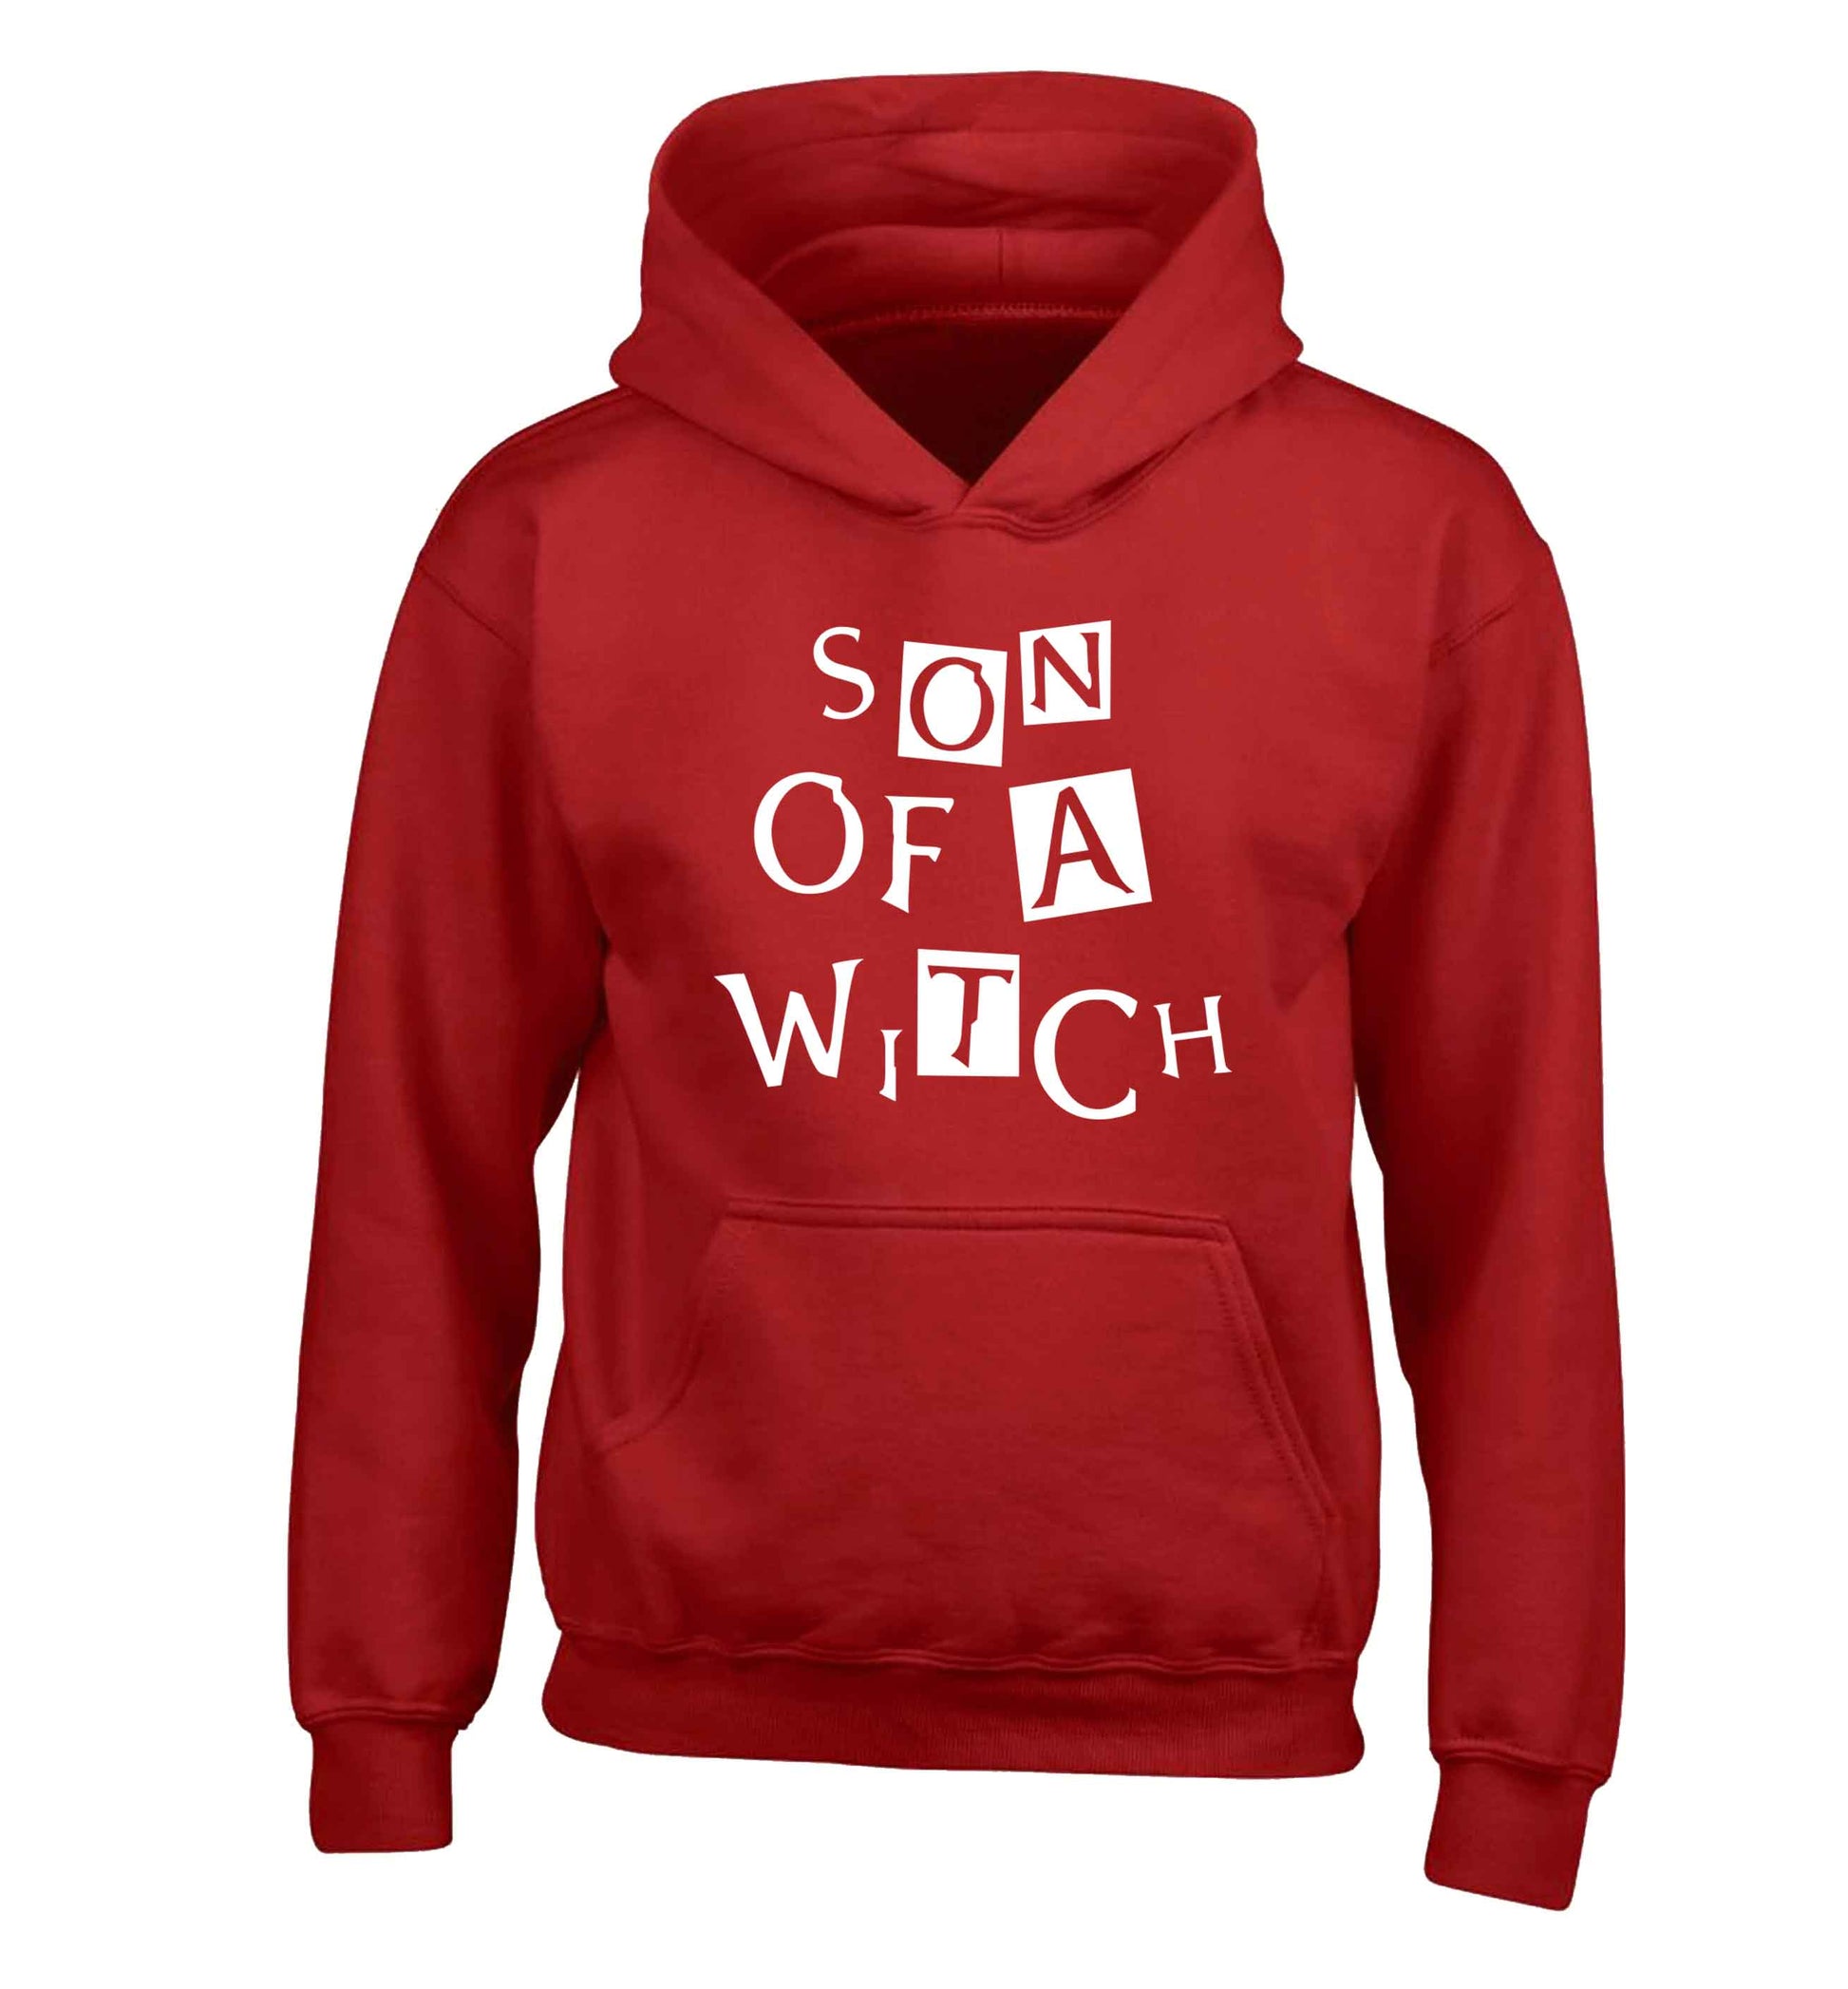 Son of a witch children's red hoodie 12-13 Years